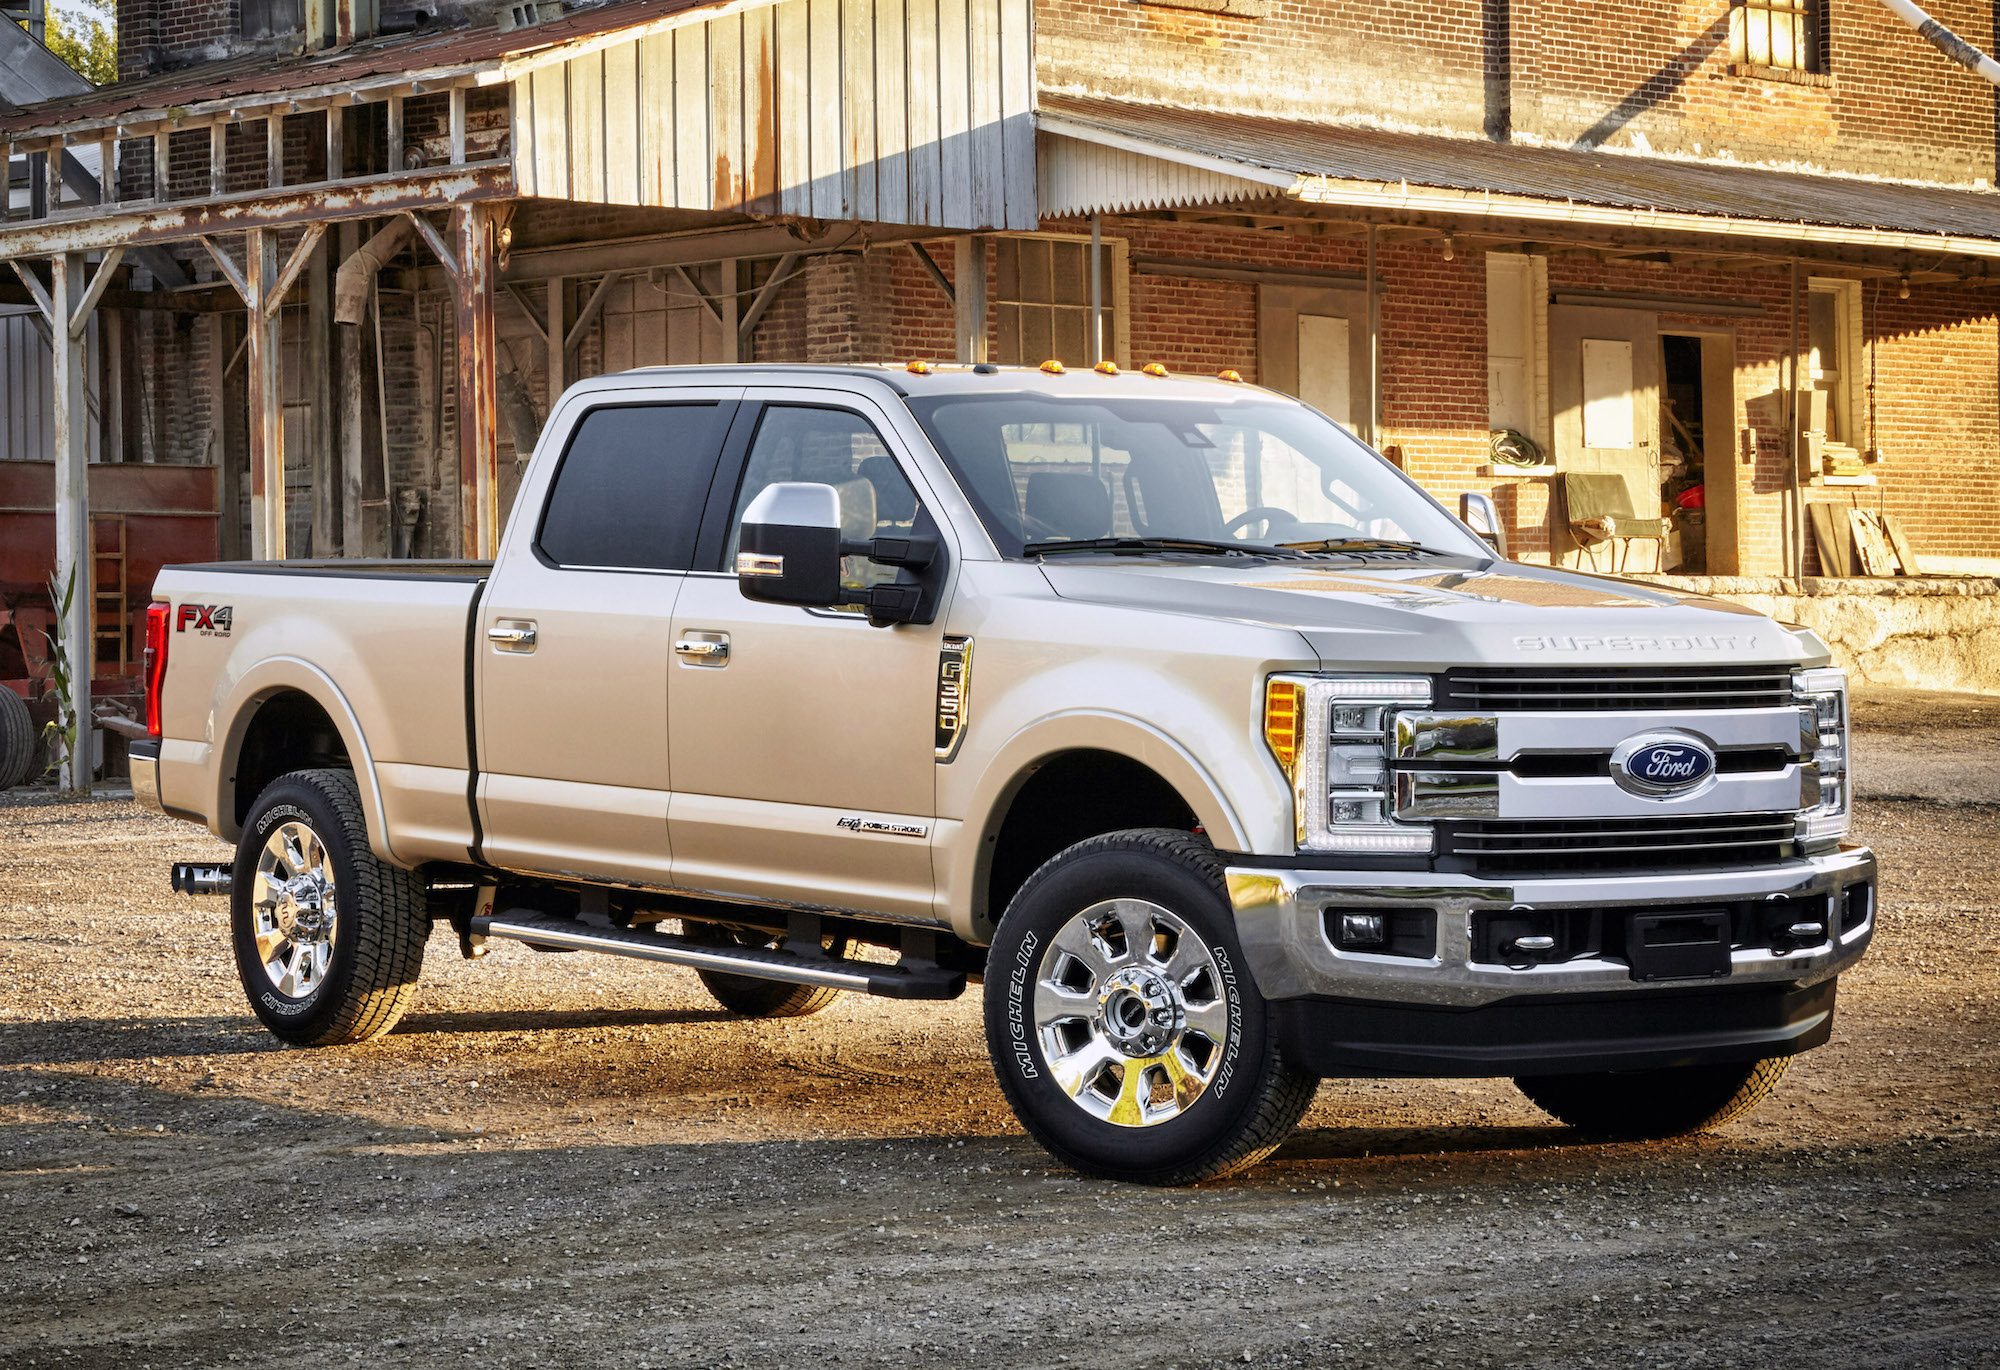 FORD Truck-F350 Super Duty Used Engines